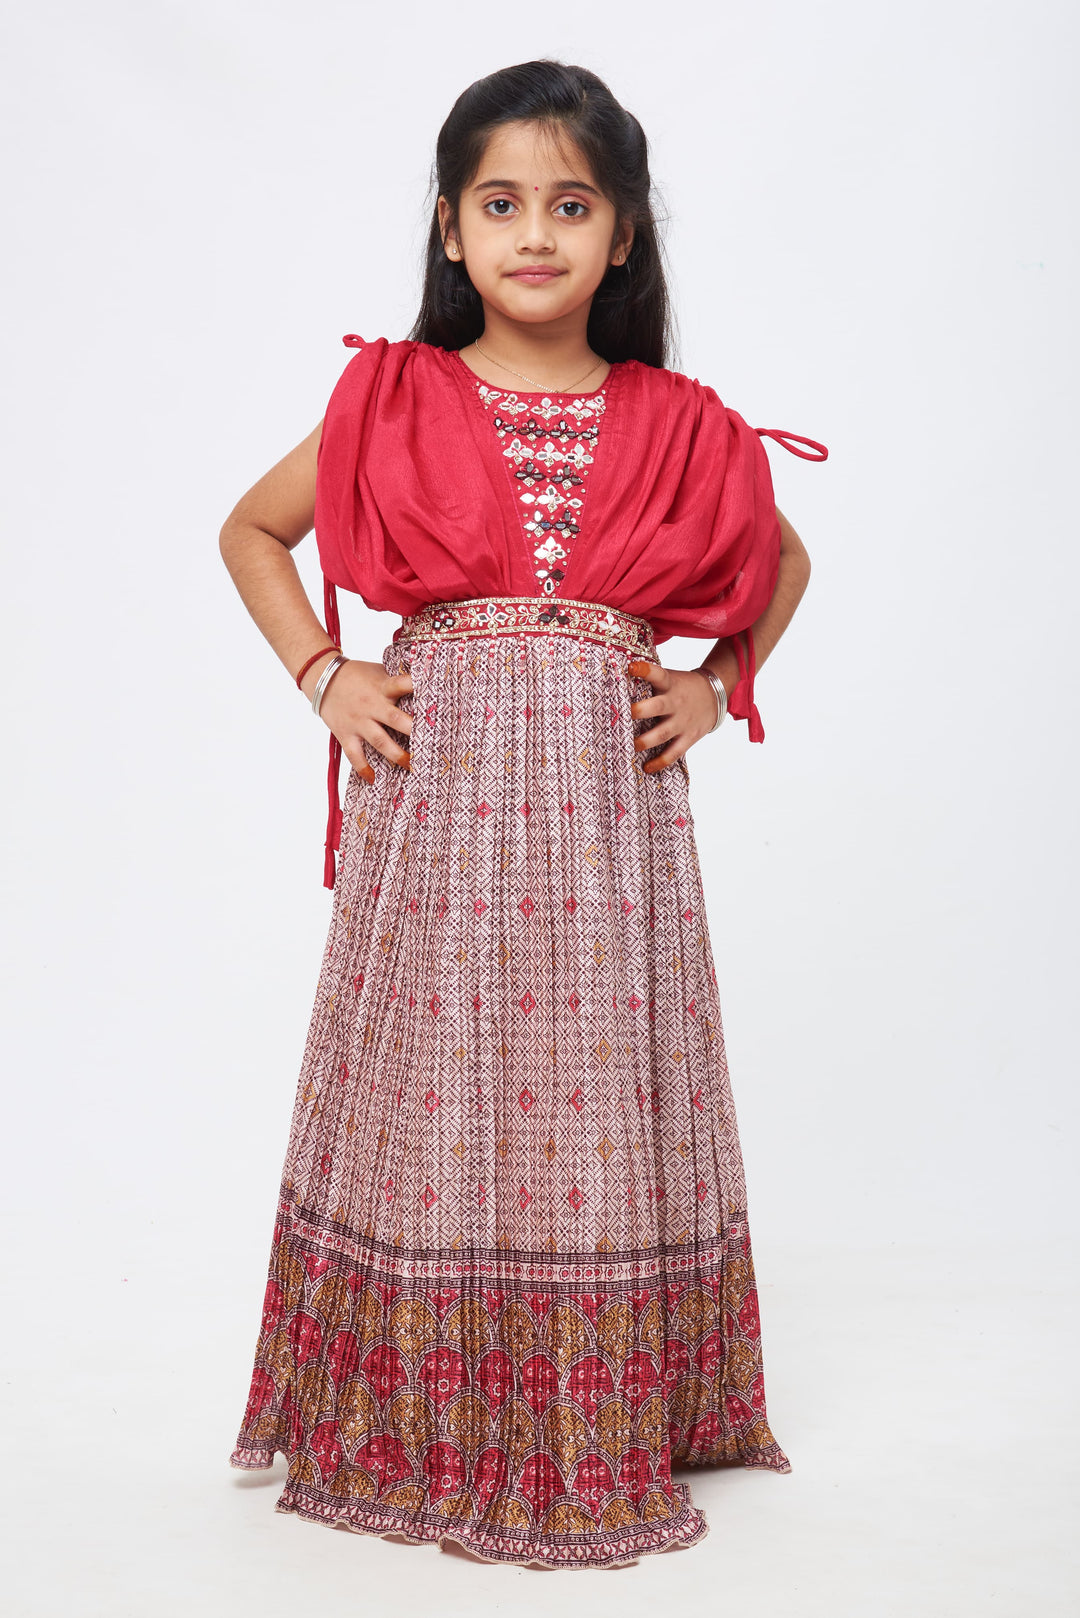 The Nesavu Girls Party Gown Regal Radiance: Puffed-Sleeve Mirror Embellished Traditional Anarkali Gown for Girls Nesavu 20 (3Y) / Red / Chinnon GA143B-20 Regal Layers: Distinctive Anarkali Dresses for Little Girls | The Nesavu